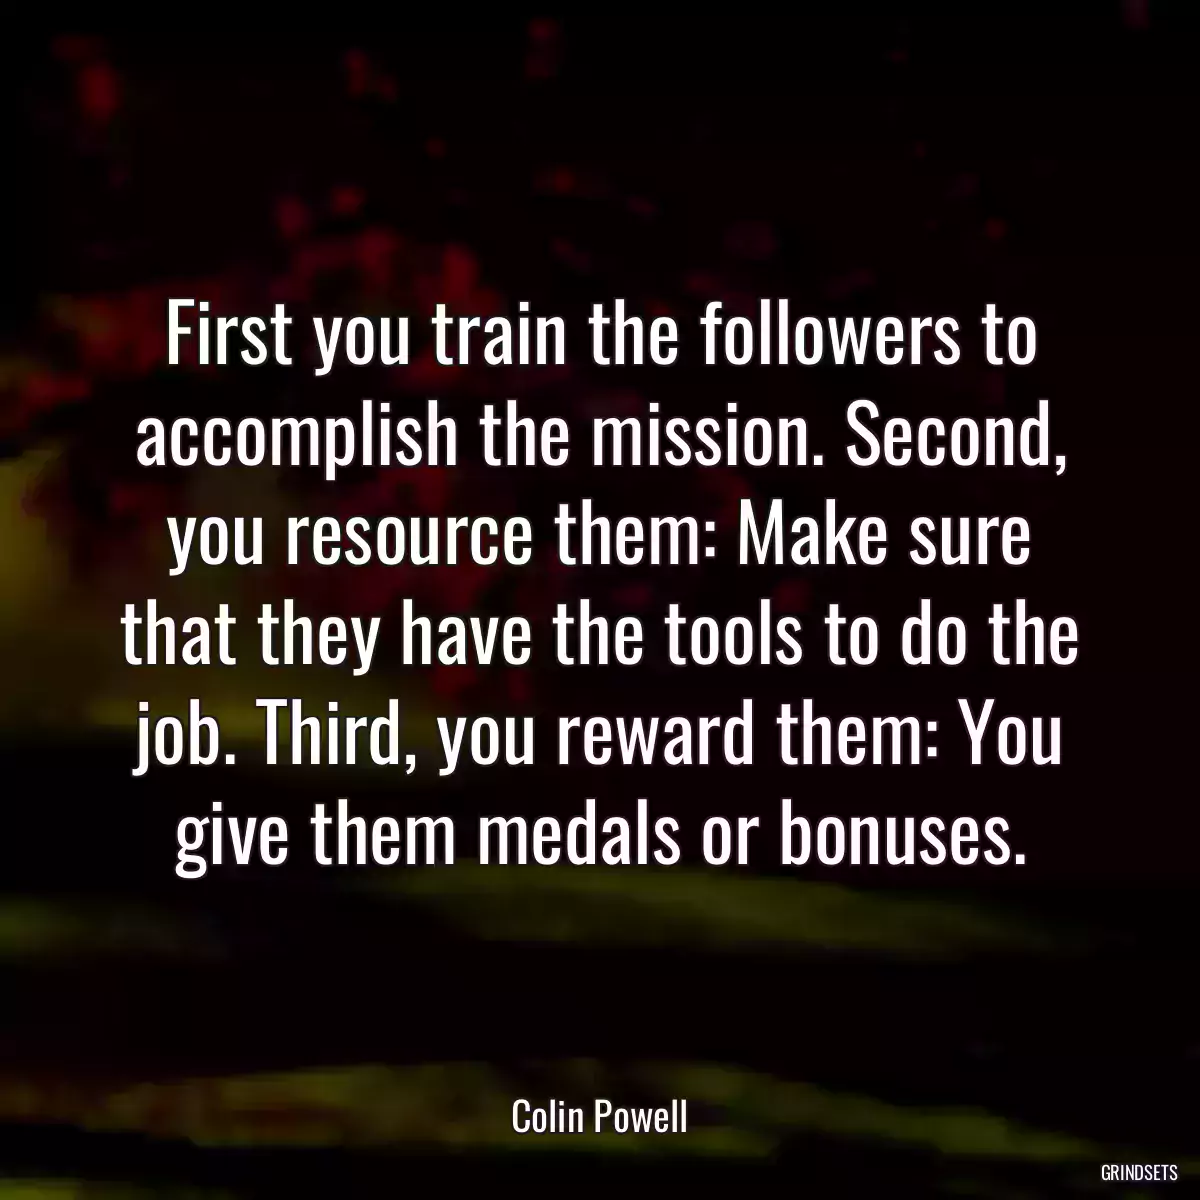 First you train the followers to accomplish the mission. Second, you resource them: Make sure that they have the tools to do the job. Third, you reward them: You give them medals or bonuses.